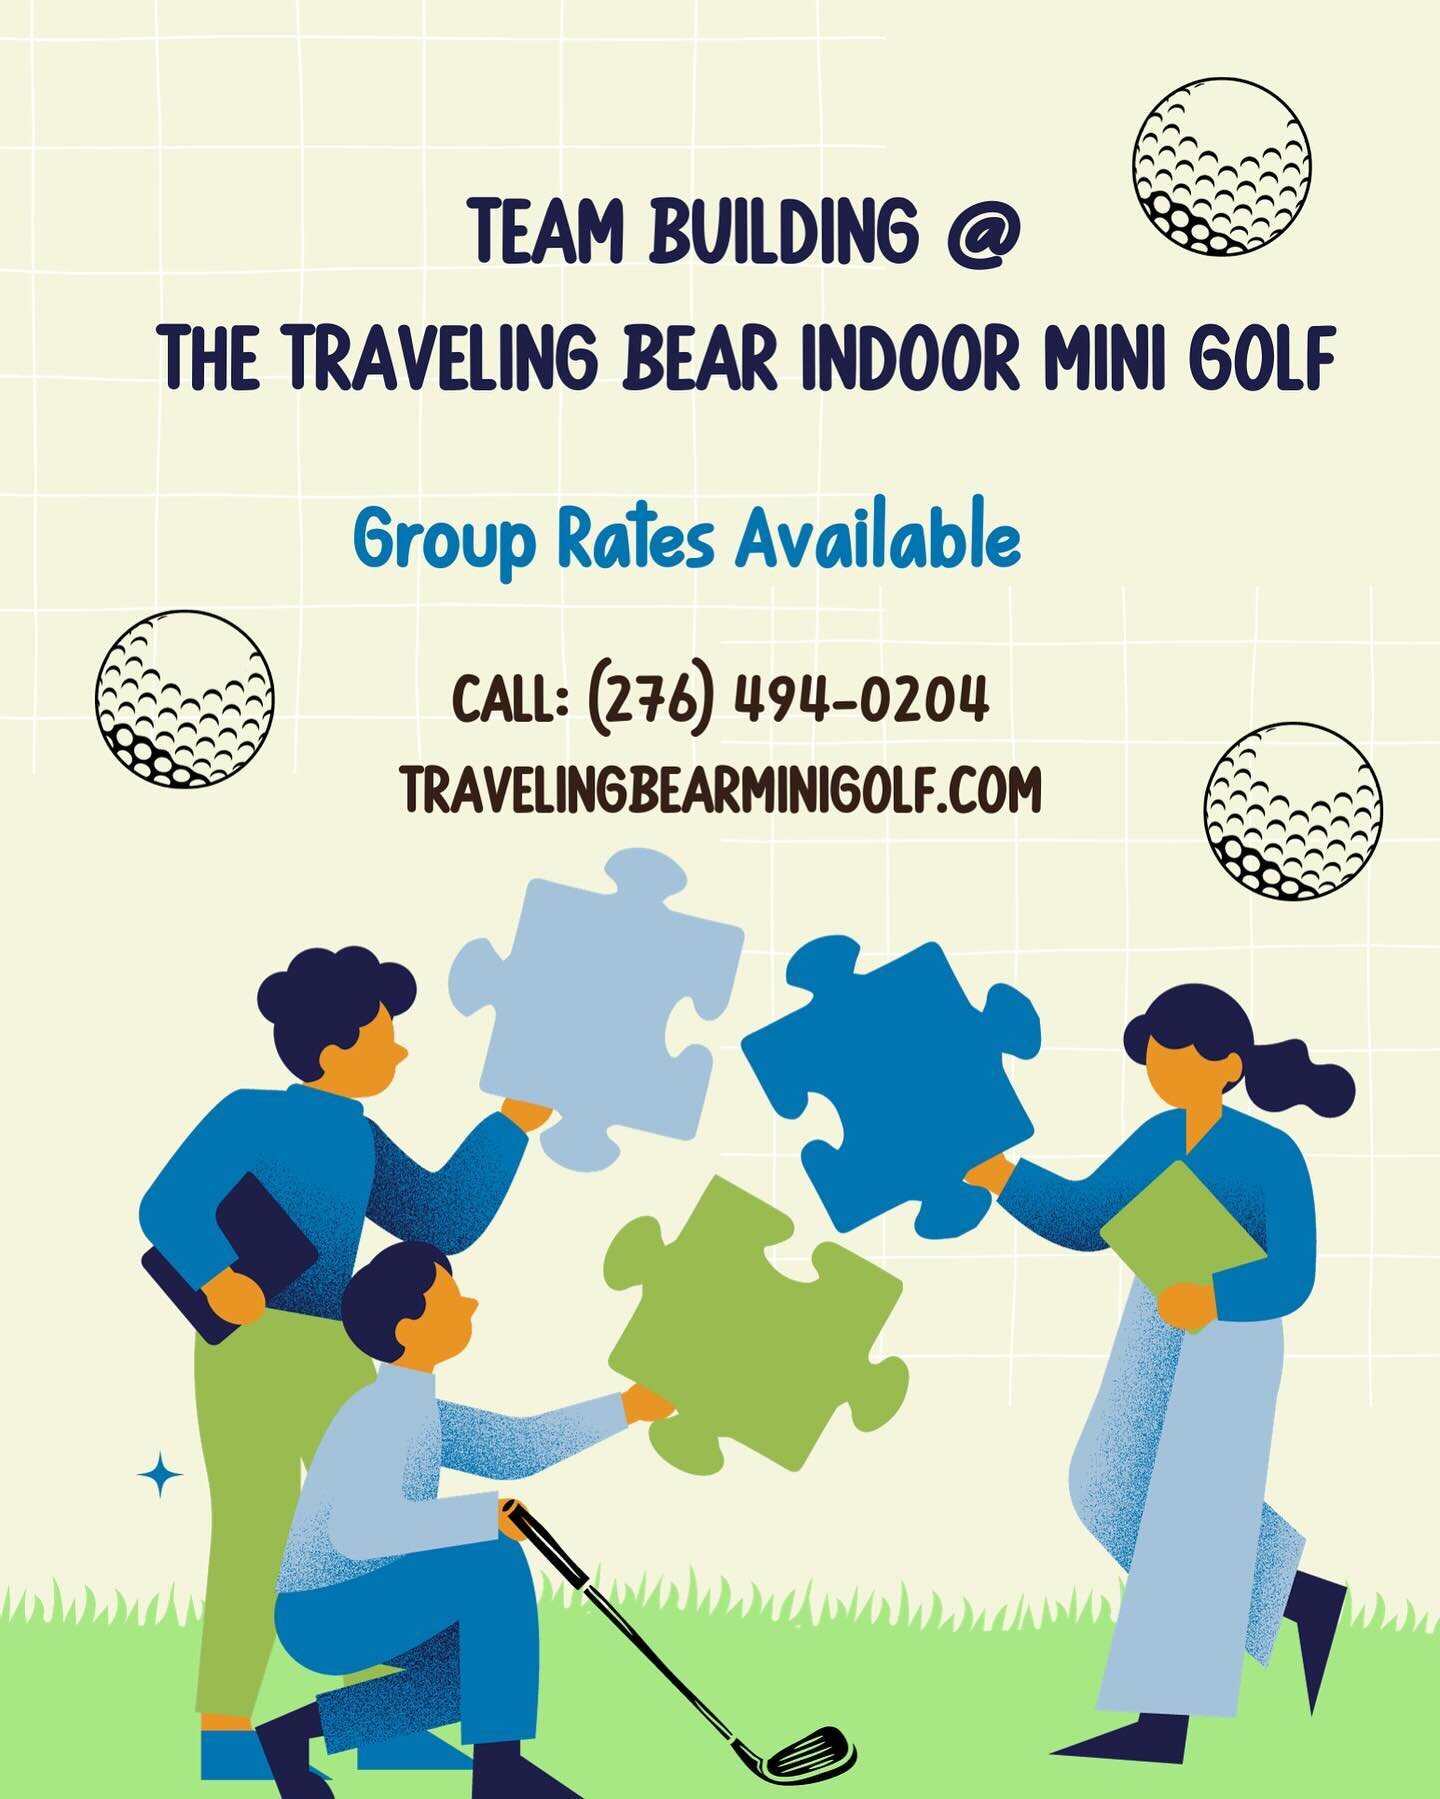 Needing some time away from work to refocus? Come experience Team Building at The Traveling Bear!!